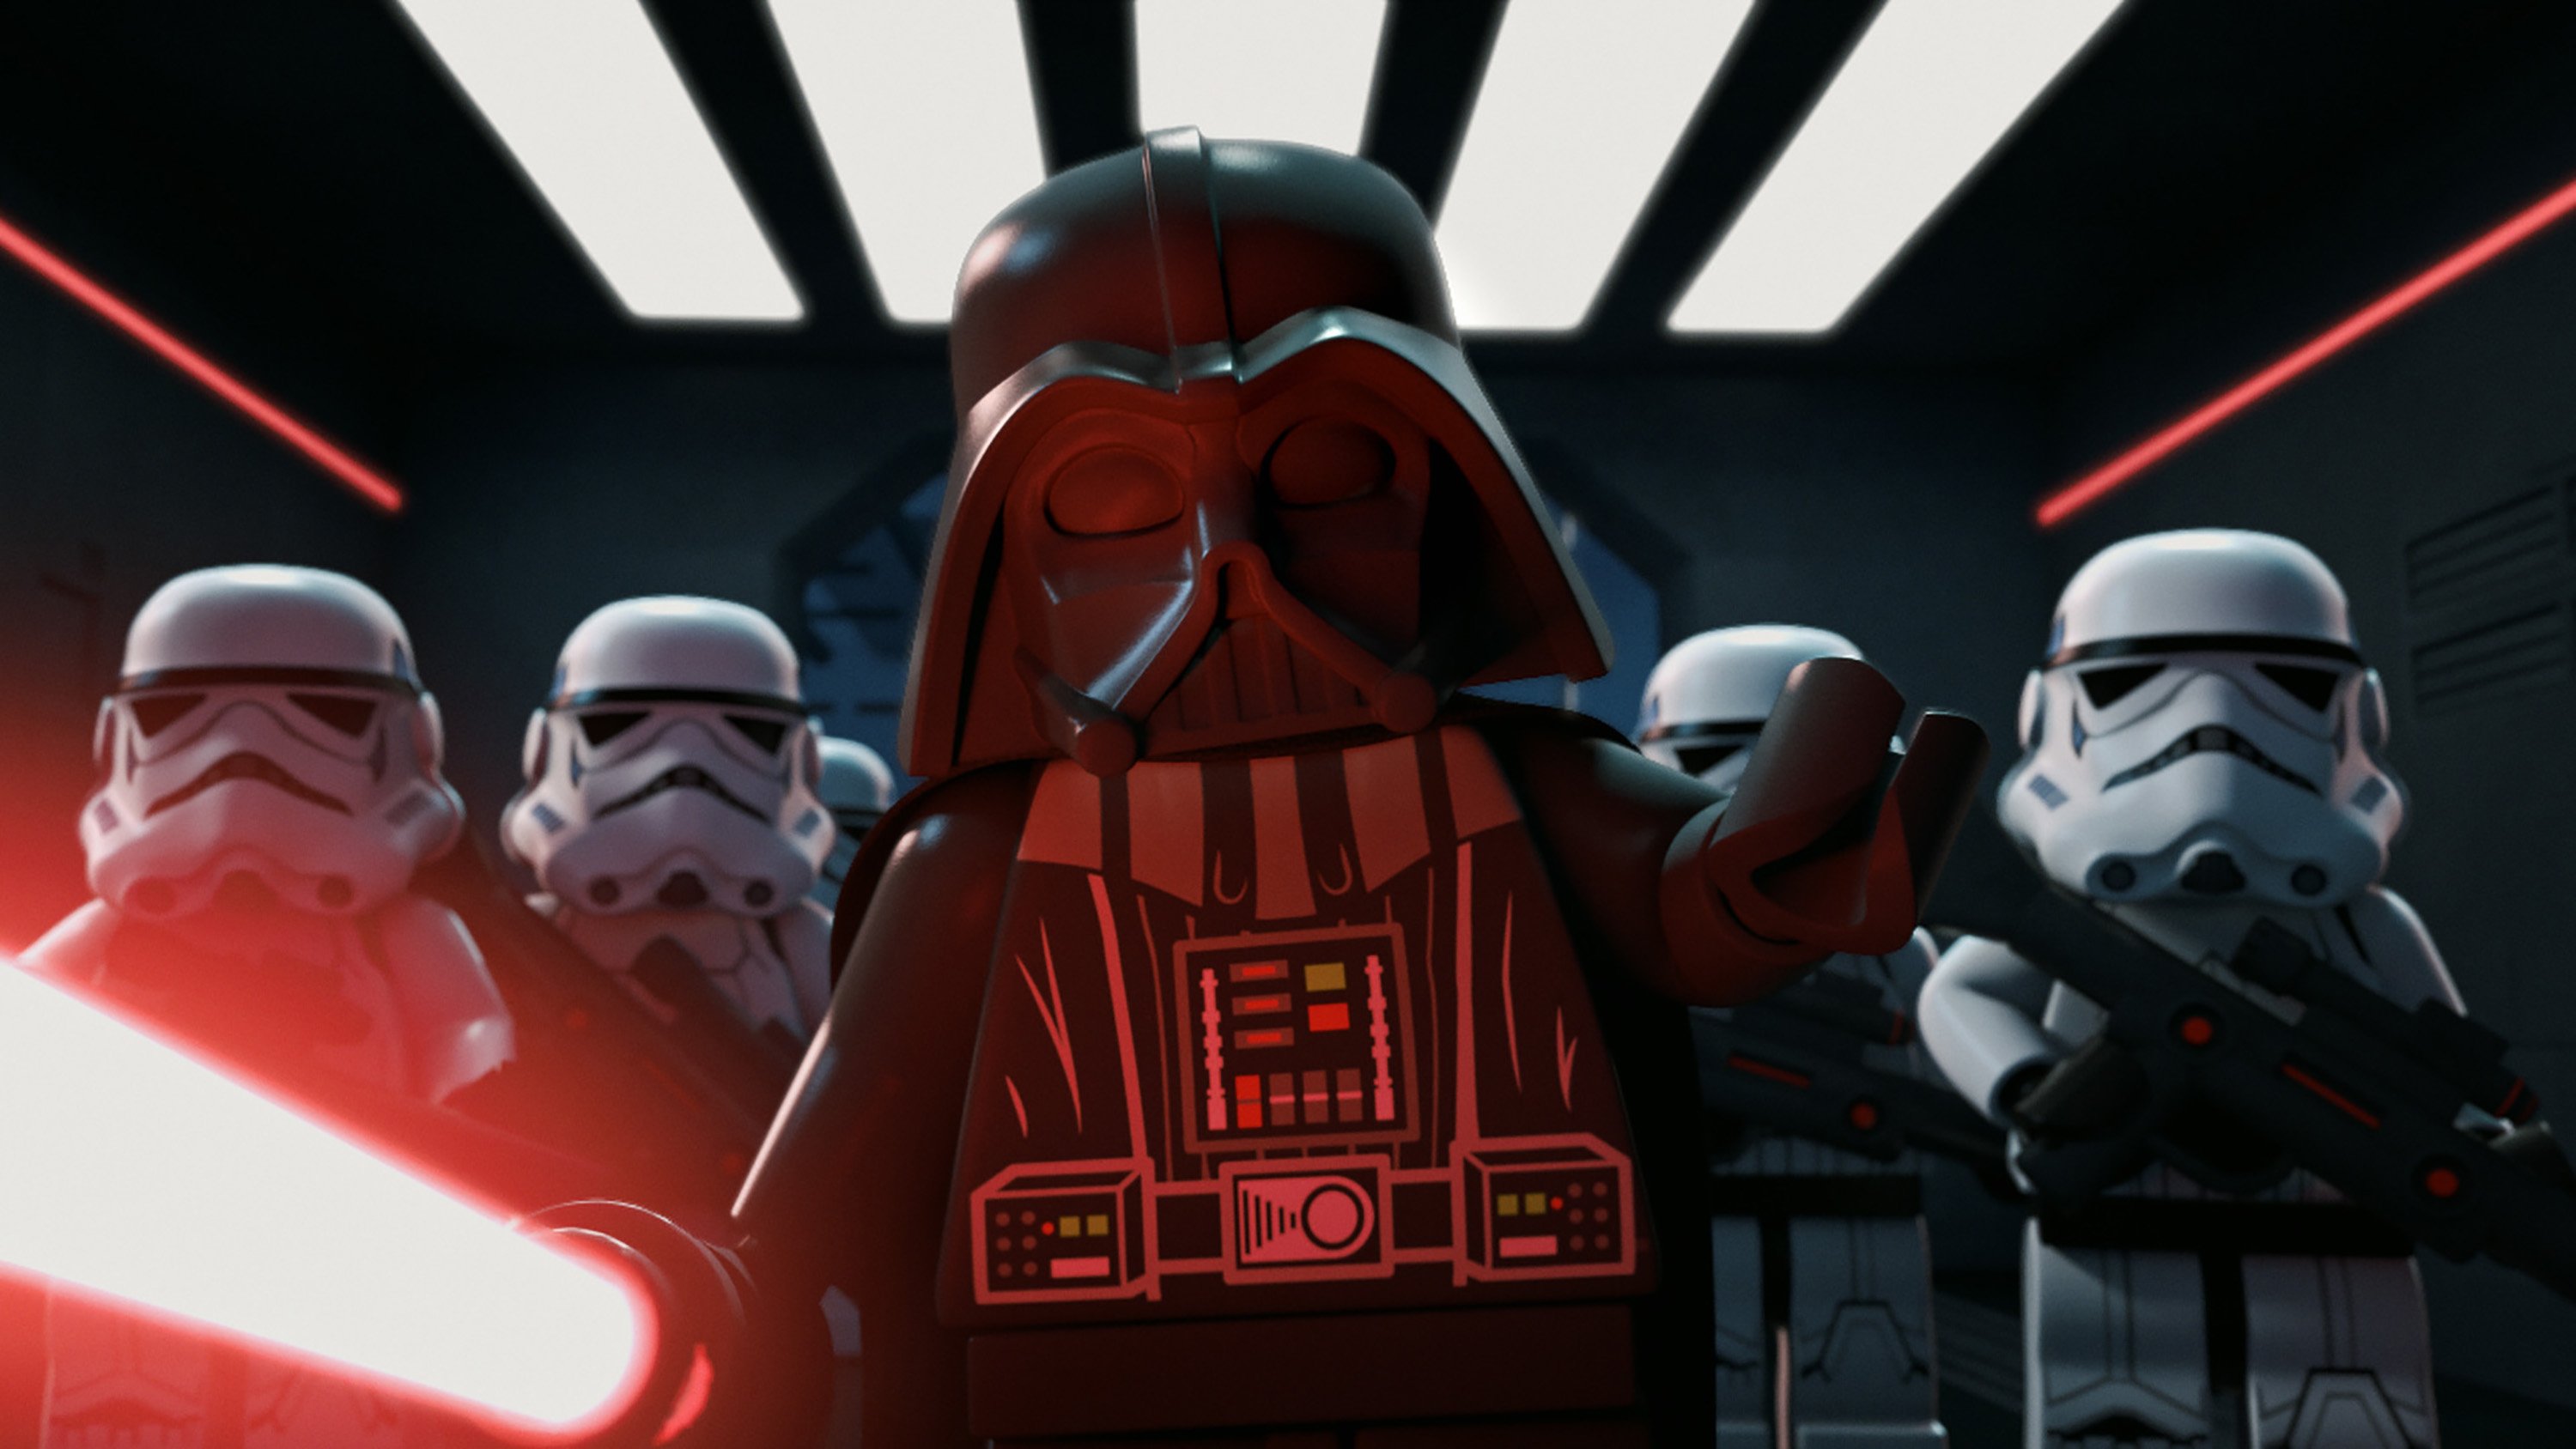 LEGO Star Wars darth vadar and storm troopers gather to fight streaming on Disney+ with its new Halloween movies